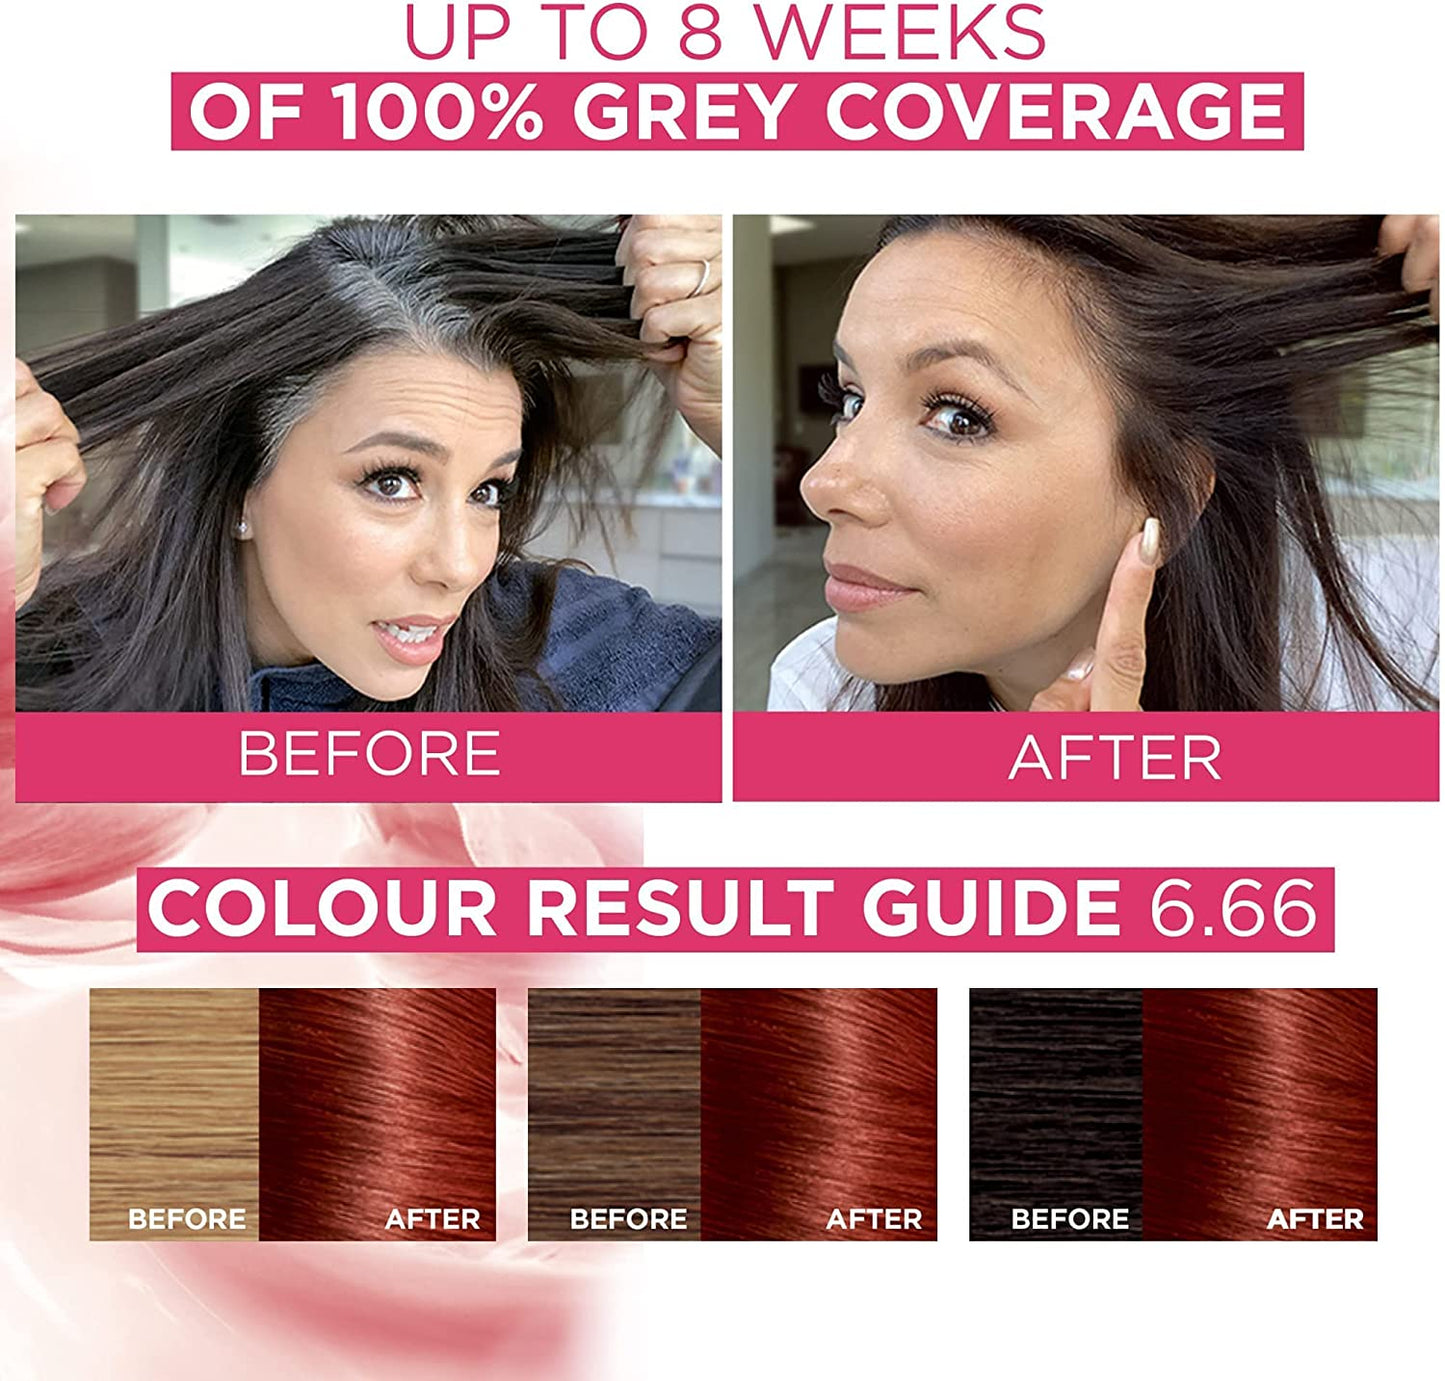 L'Oreal Paris Excellence Crème Permanent Hair Dye, up to 100% Grey Hair Coverage, Natural-Looking Hair Colour Result, Red Hair Dye 6.66 Intense Red - FoxMart™️ - L'Oréal